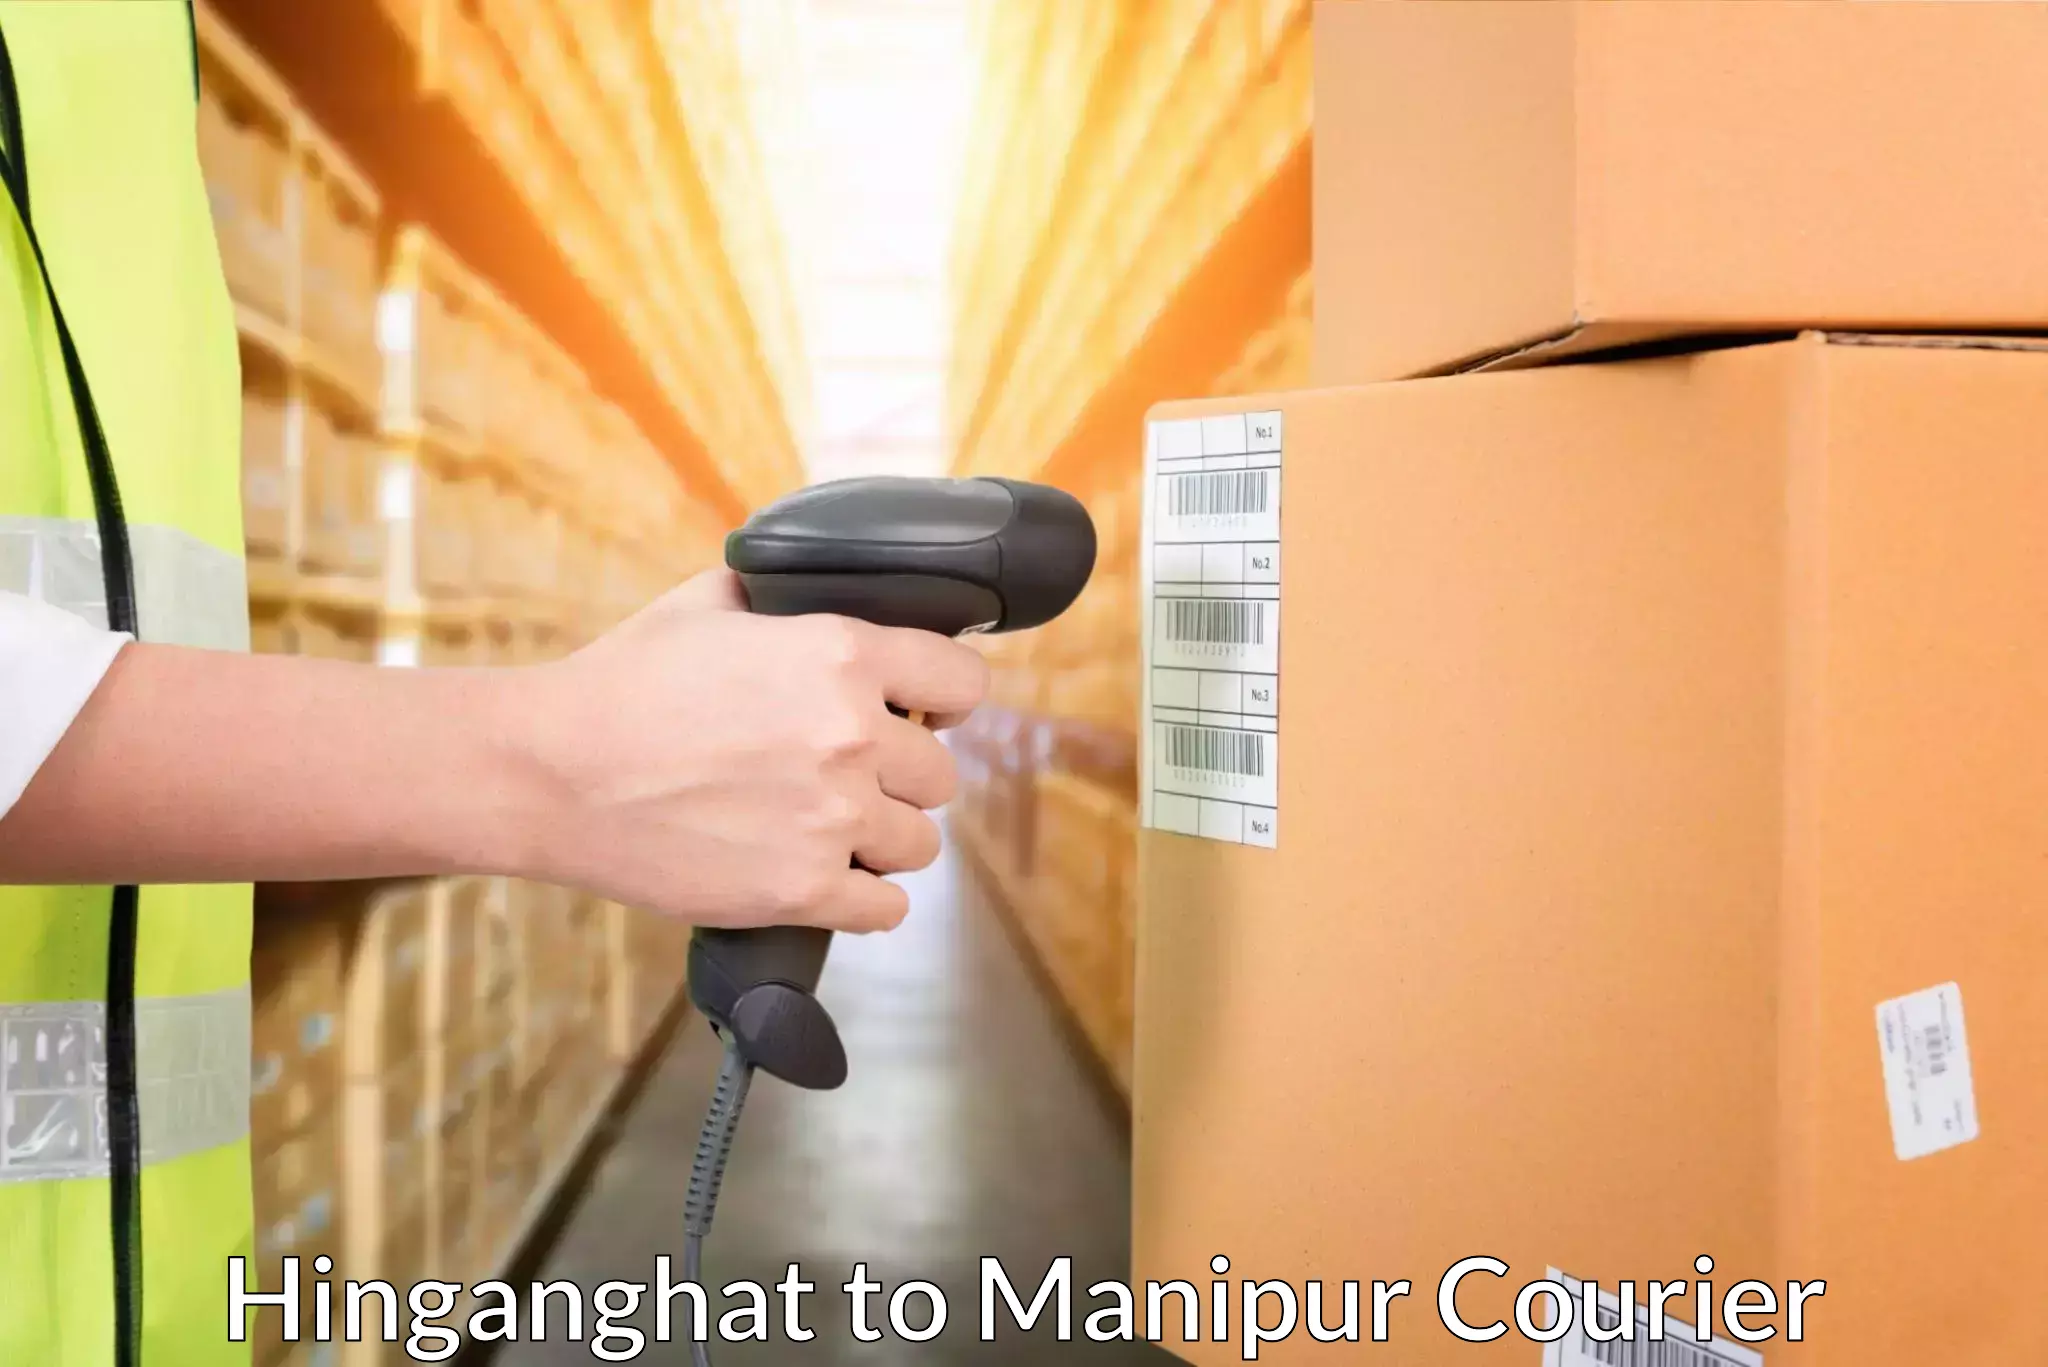 Global shipping networks Hinganghat to Manipur